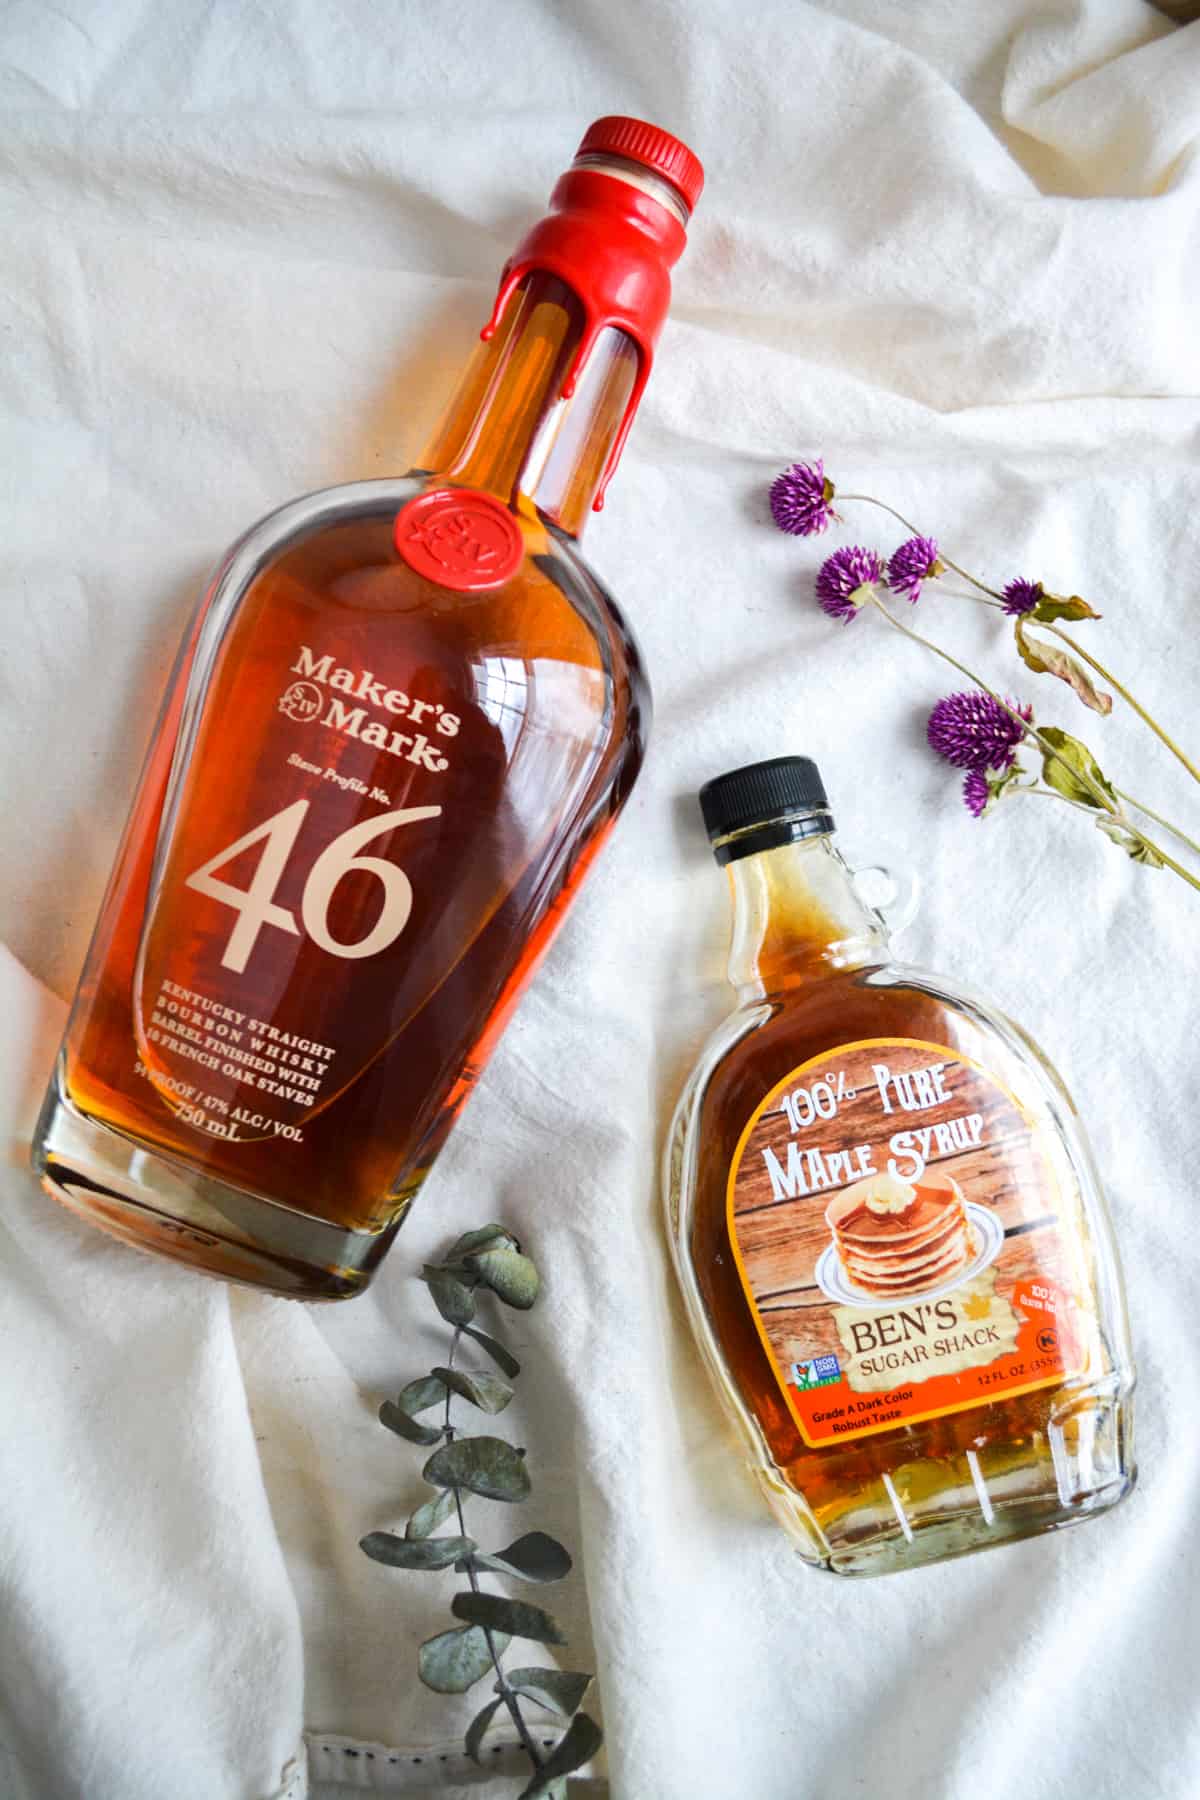 bottles of bourbon and maple syrup on a white cloth